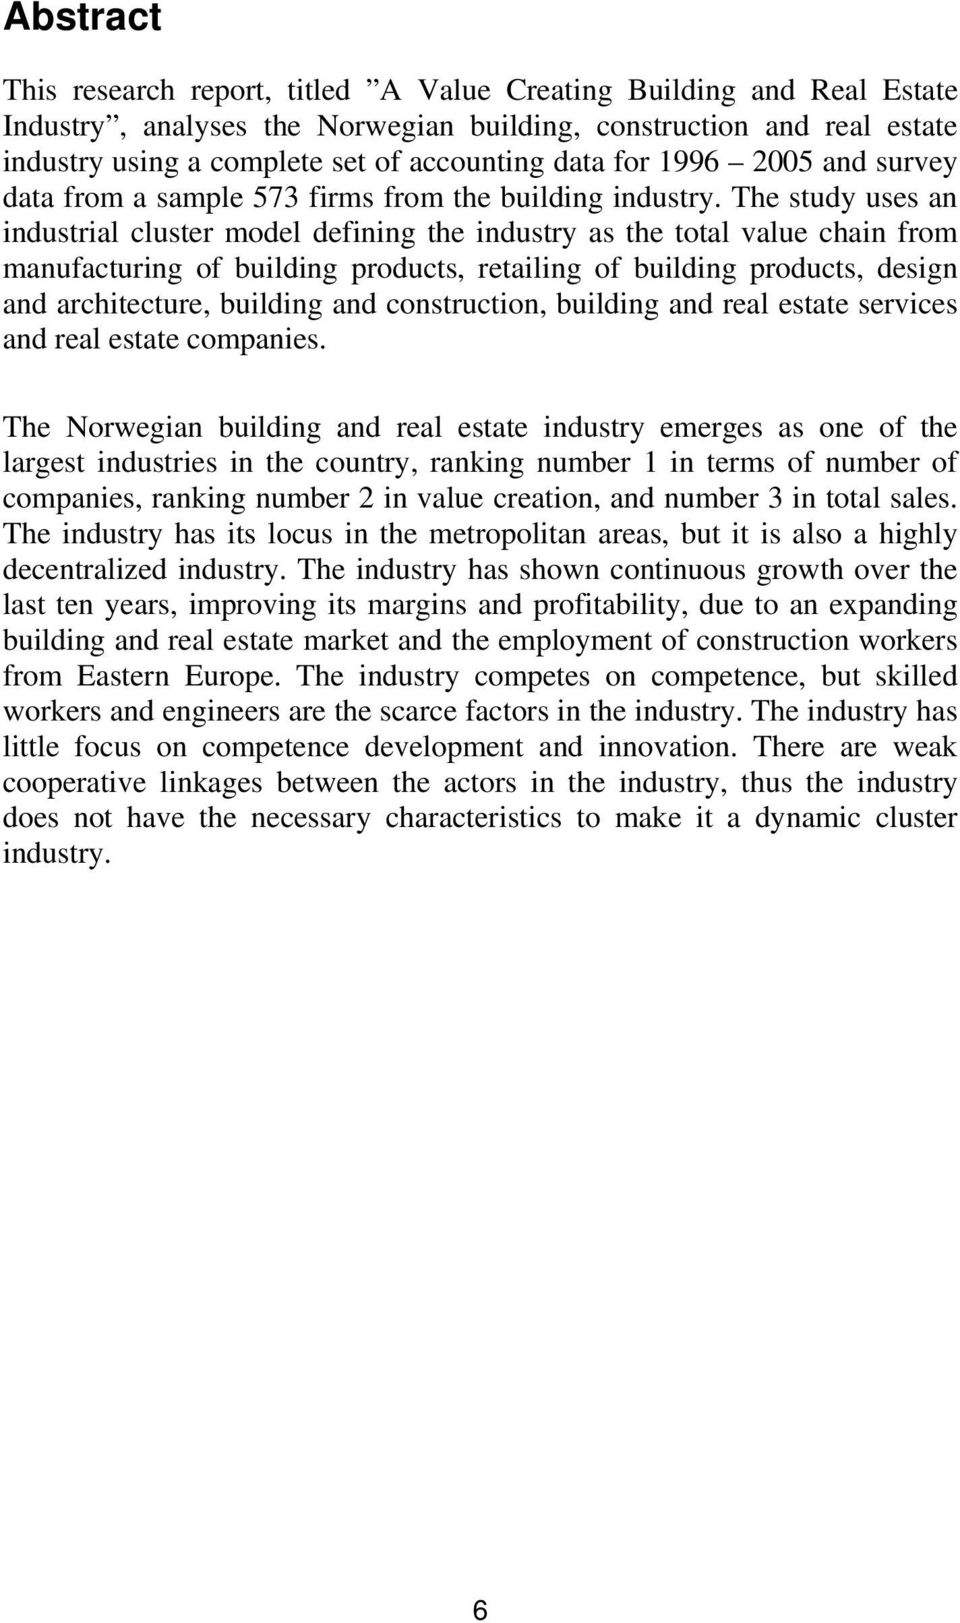 The study uses an industrial cluster model defining the industry as the total value chain from manufacturing of building products, retailing of building products, design and architecture, building